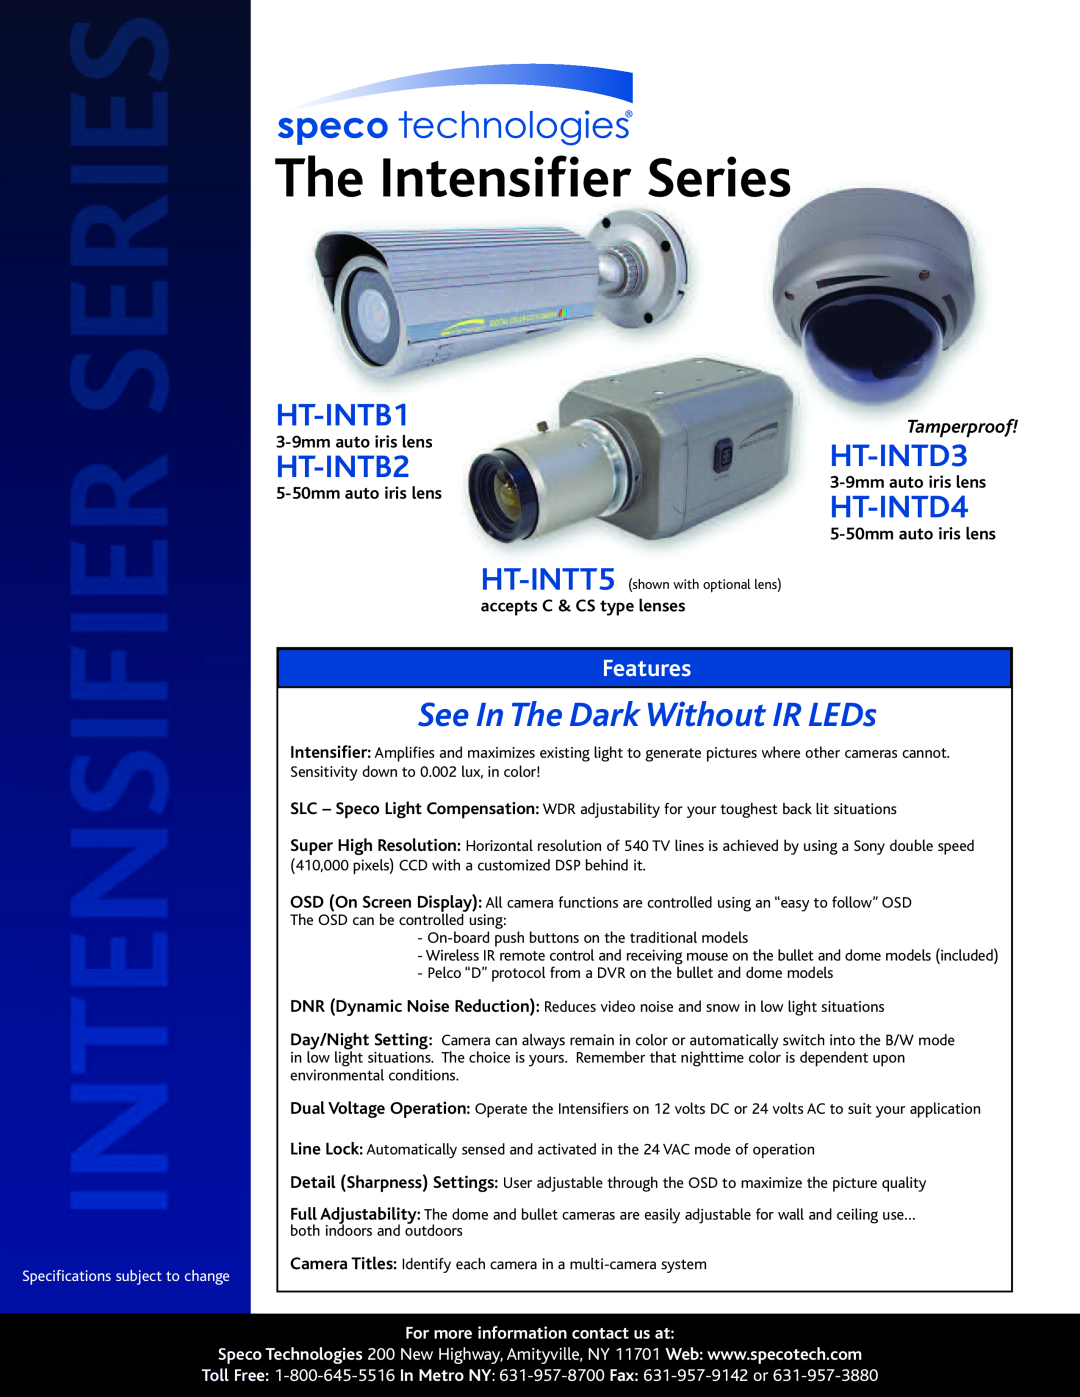 Speco Technologies HT-INTD3 specifications The Intensifier Series, 5-50mm auto iris lens, accepts C & CS type lenses 